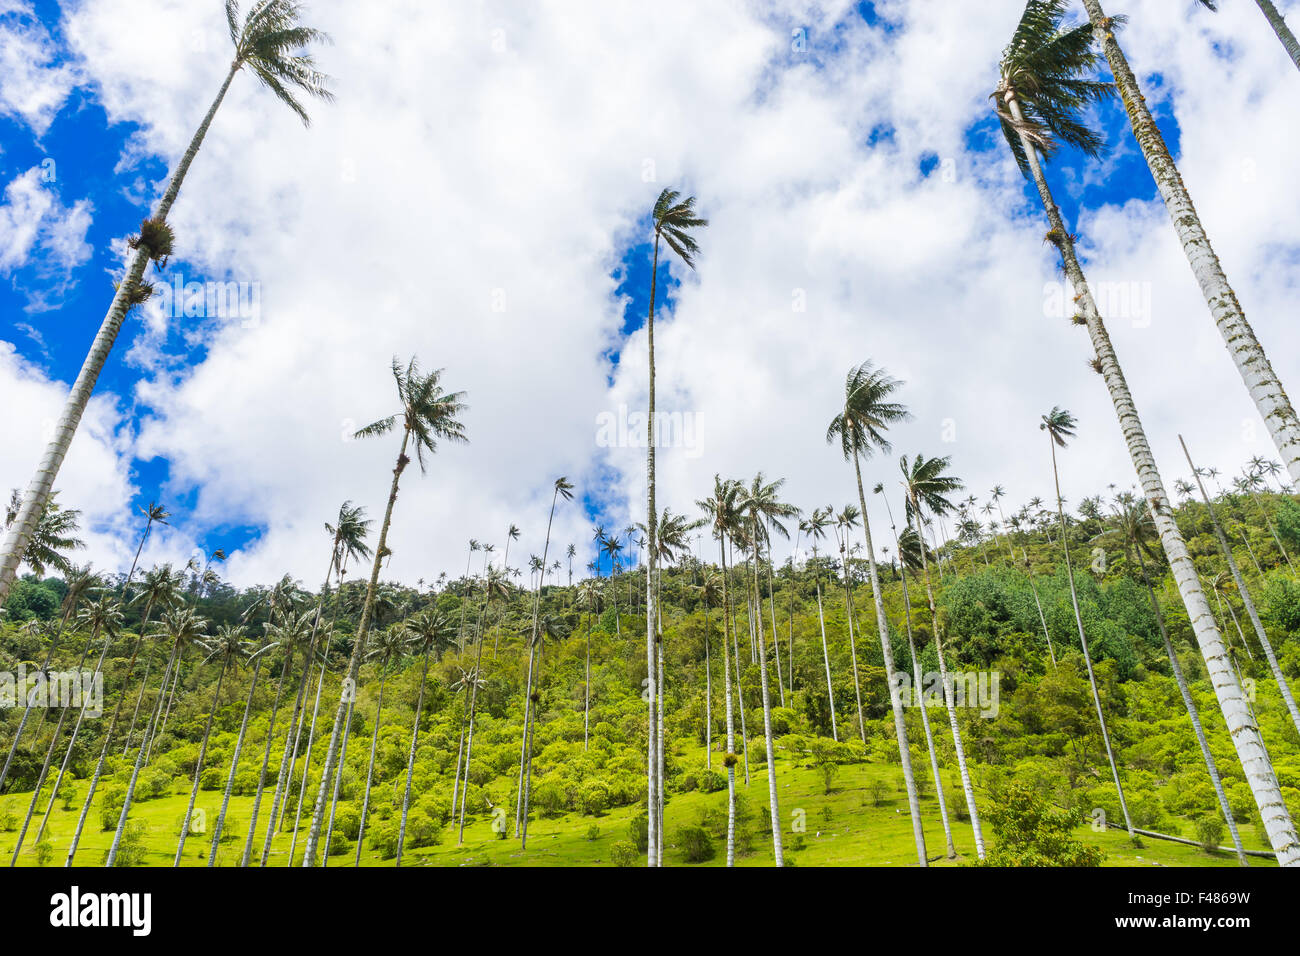 Looking up to the wax palms in the Valle de Cocora. June, 2015. Quindio, Colombia. Stock Photo